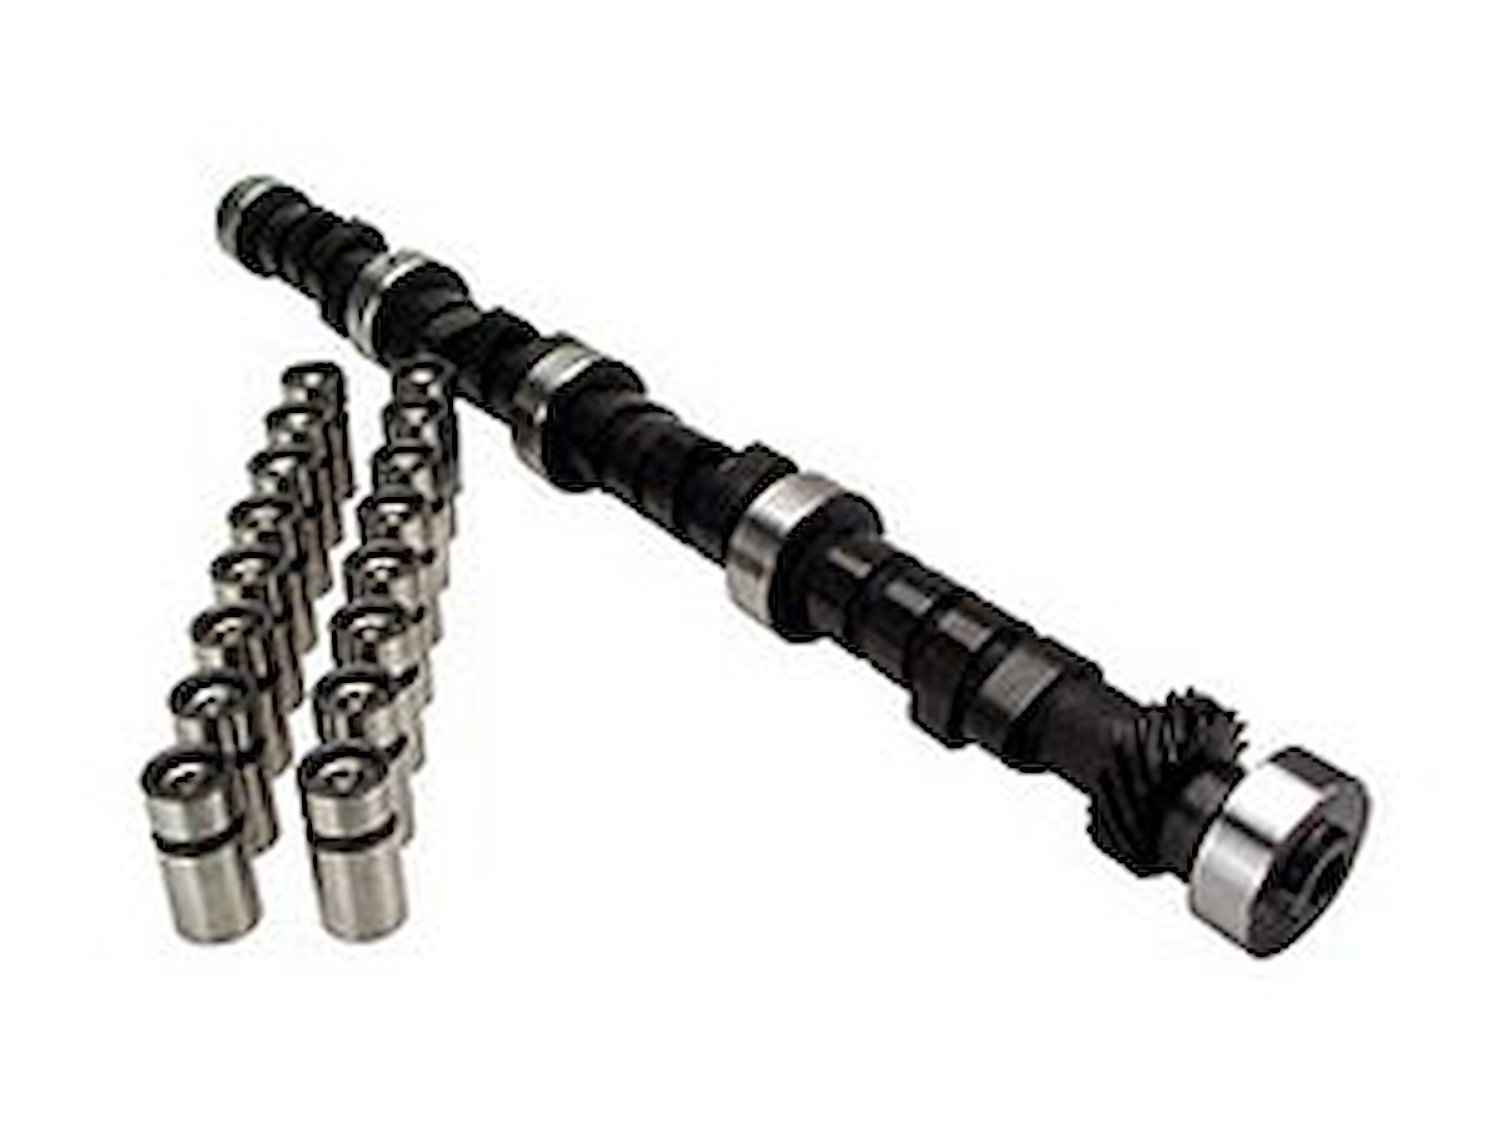 Magnum 270H Hydraulic Flat Tappet Camshaft & Lifter